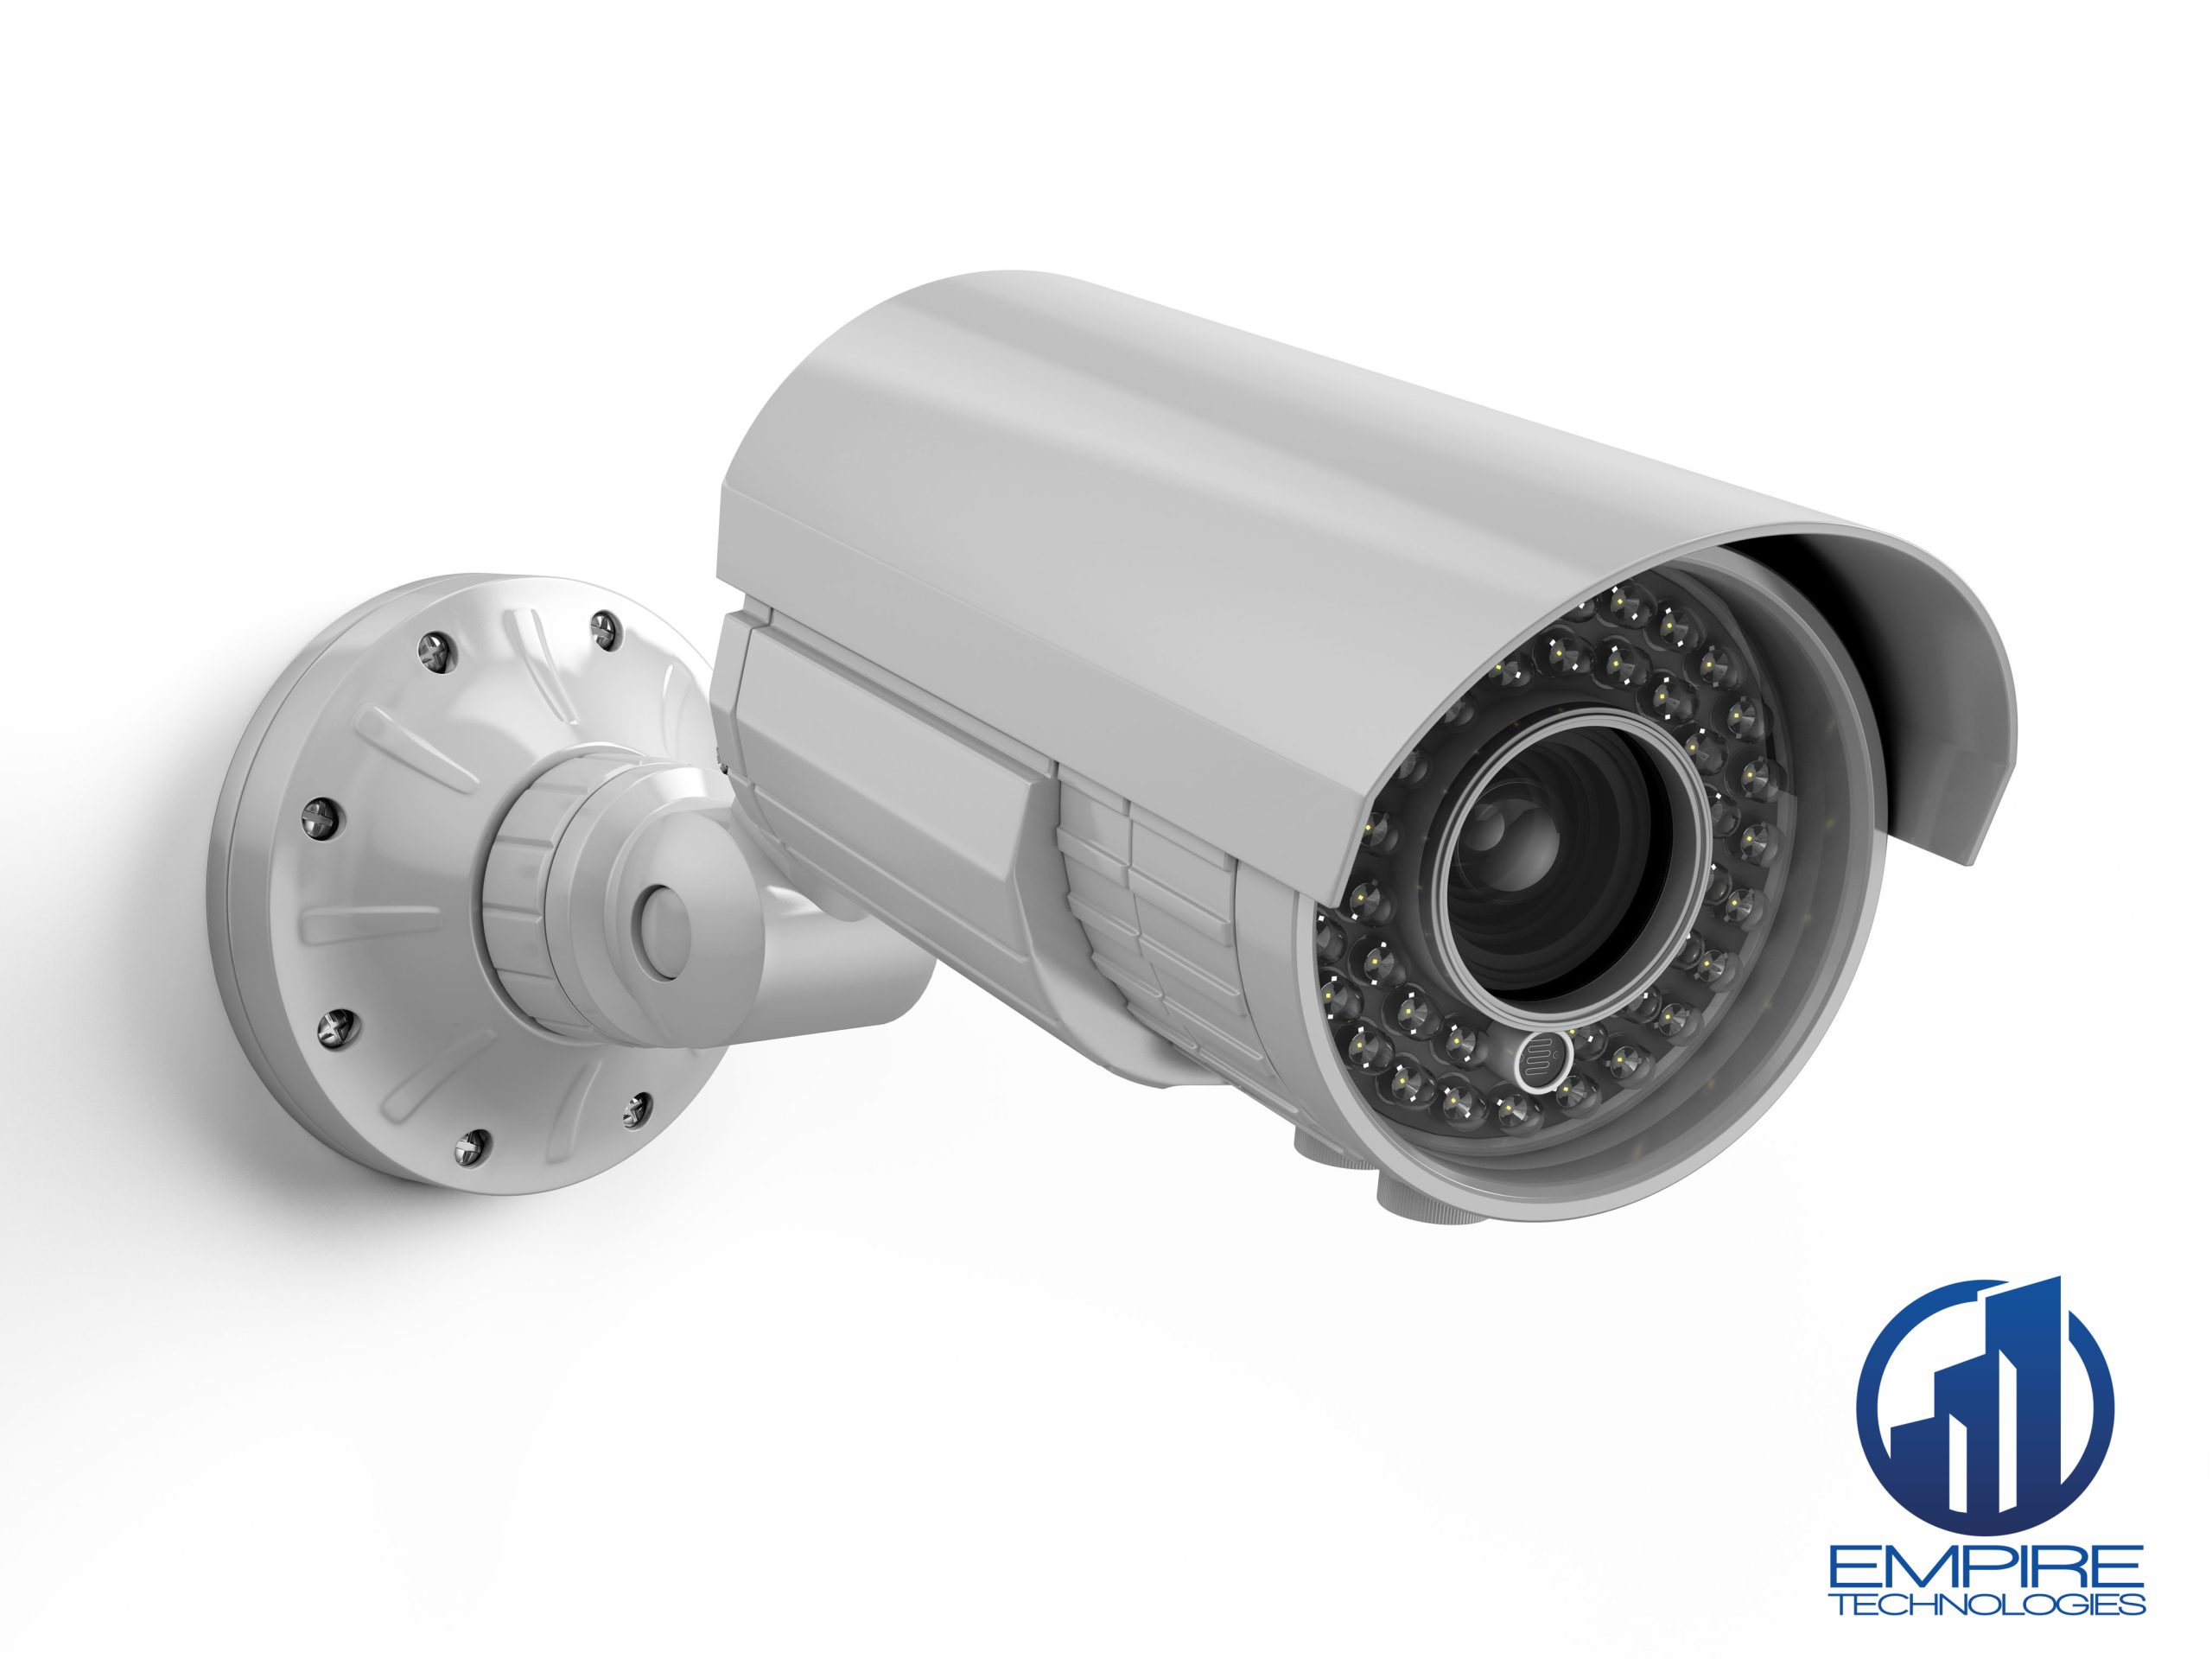 The Benefits of Surveillance & Security Camera Installation for Businesses in the City